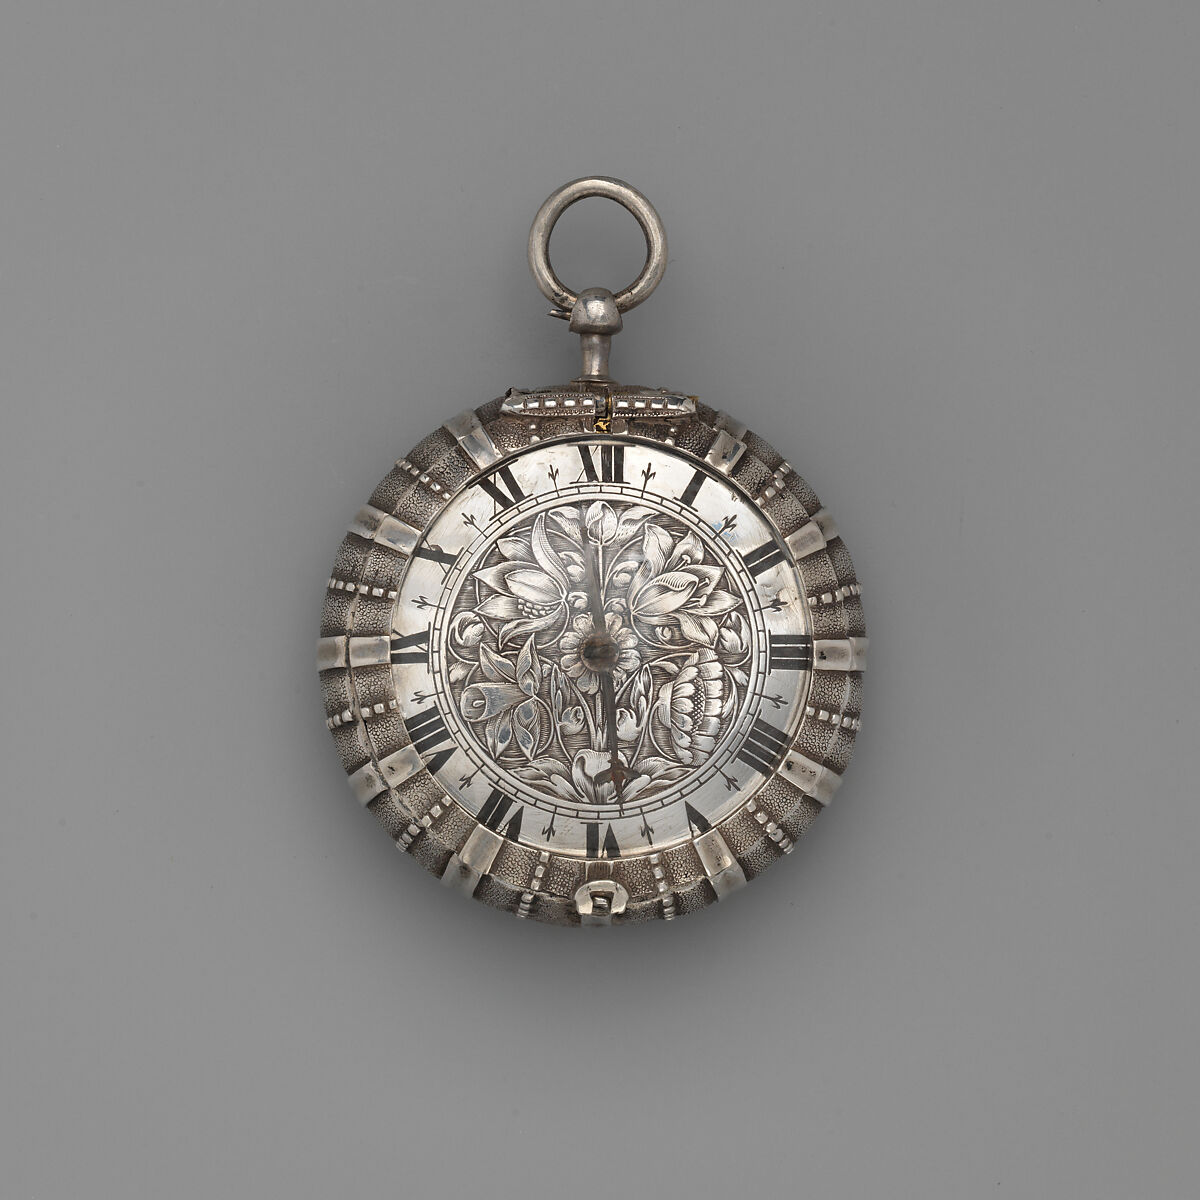 Watch, Watchmaker: Robert Smith (British, working 1630, Clockmakers&#39; Company 1640, master 1650, died 1654), Case and dial: silver and gilded brass; Movement: gilded brass, steel, partly blued, and silver, British, London 